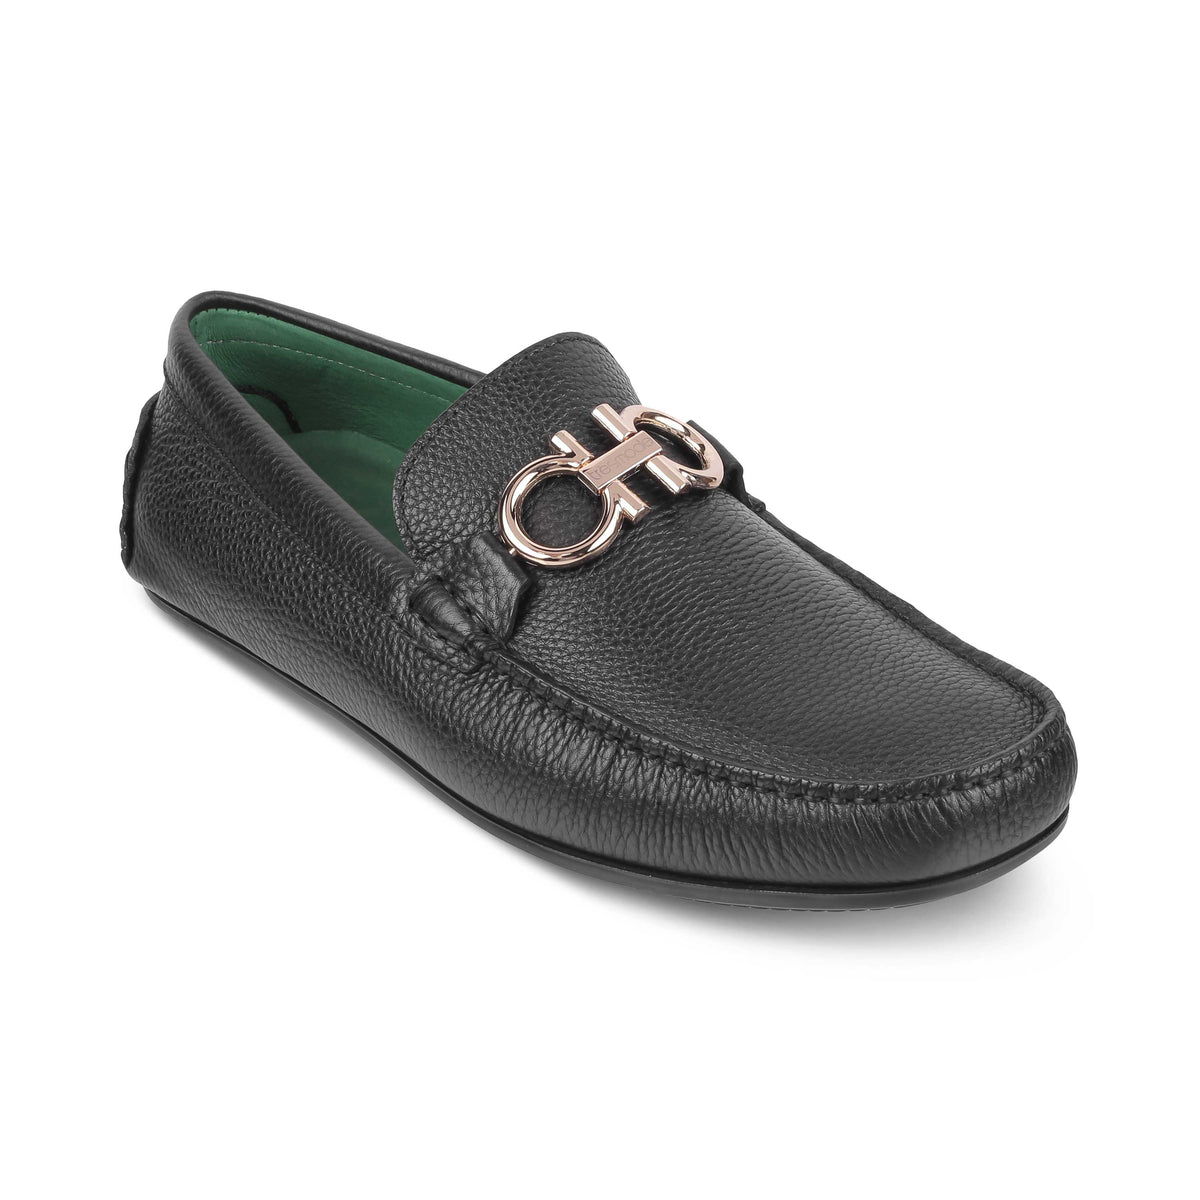 Tresmode Stpierre Black Men's Leather Driving Loafers - Tresmode